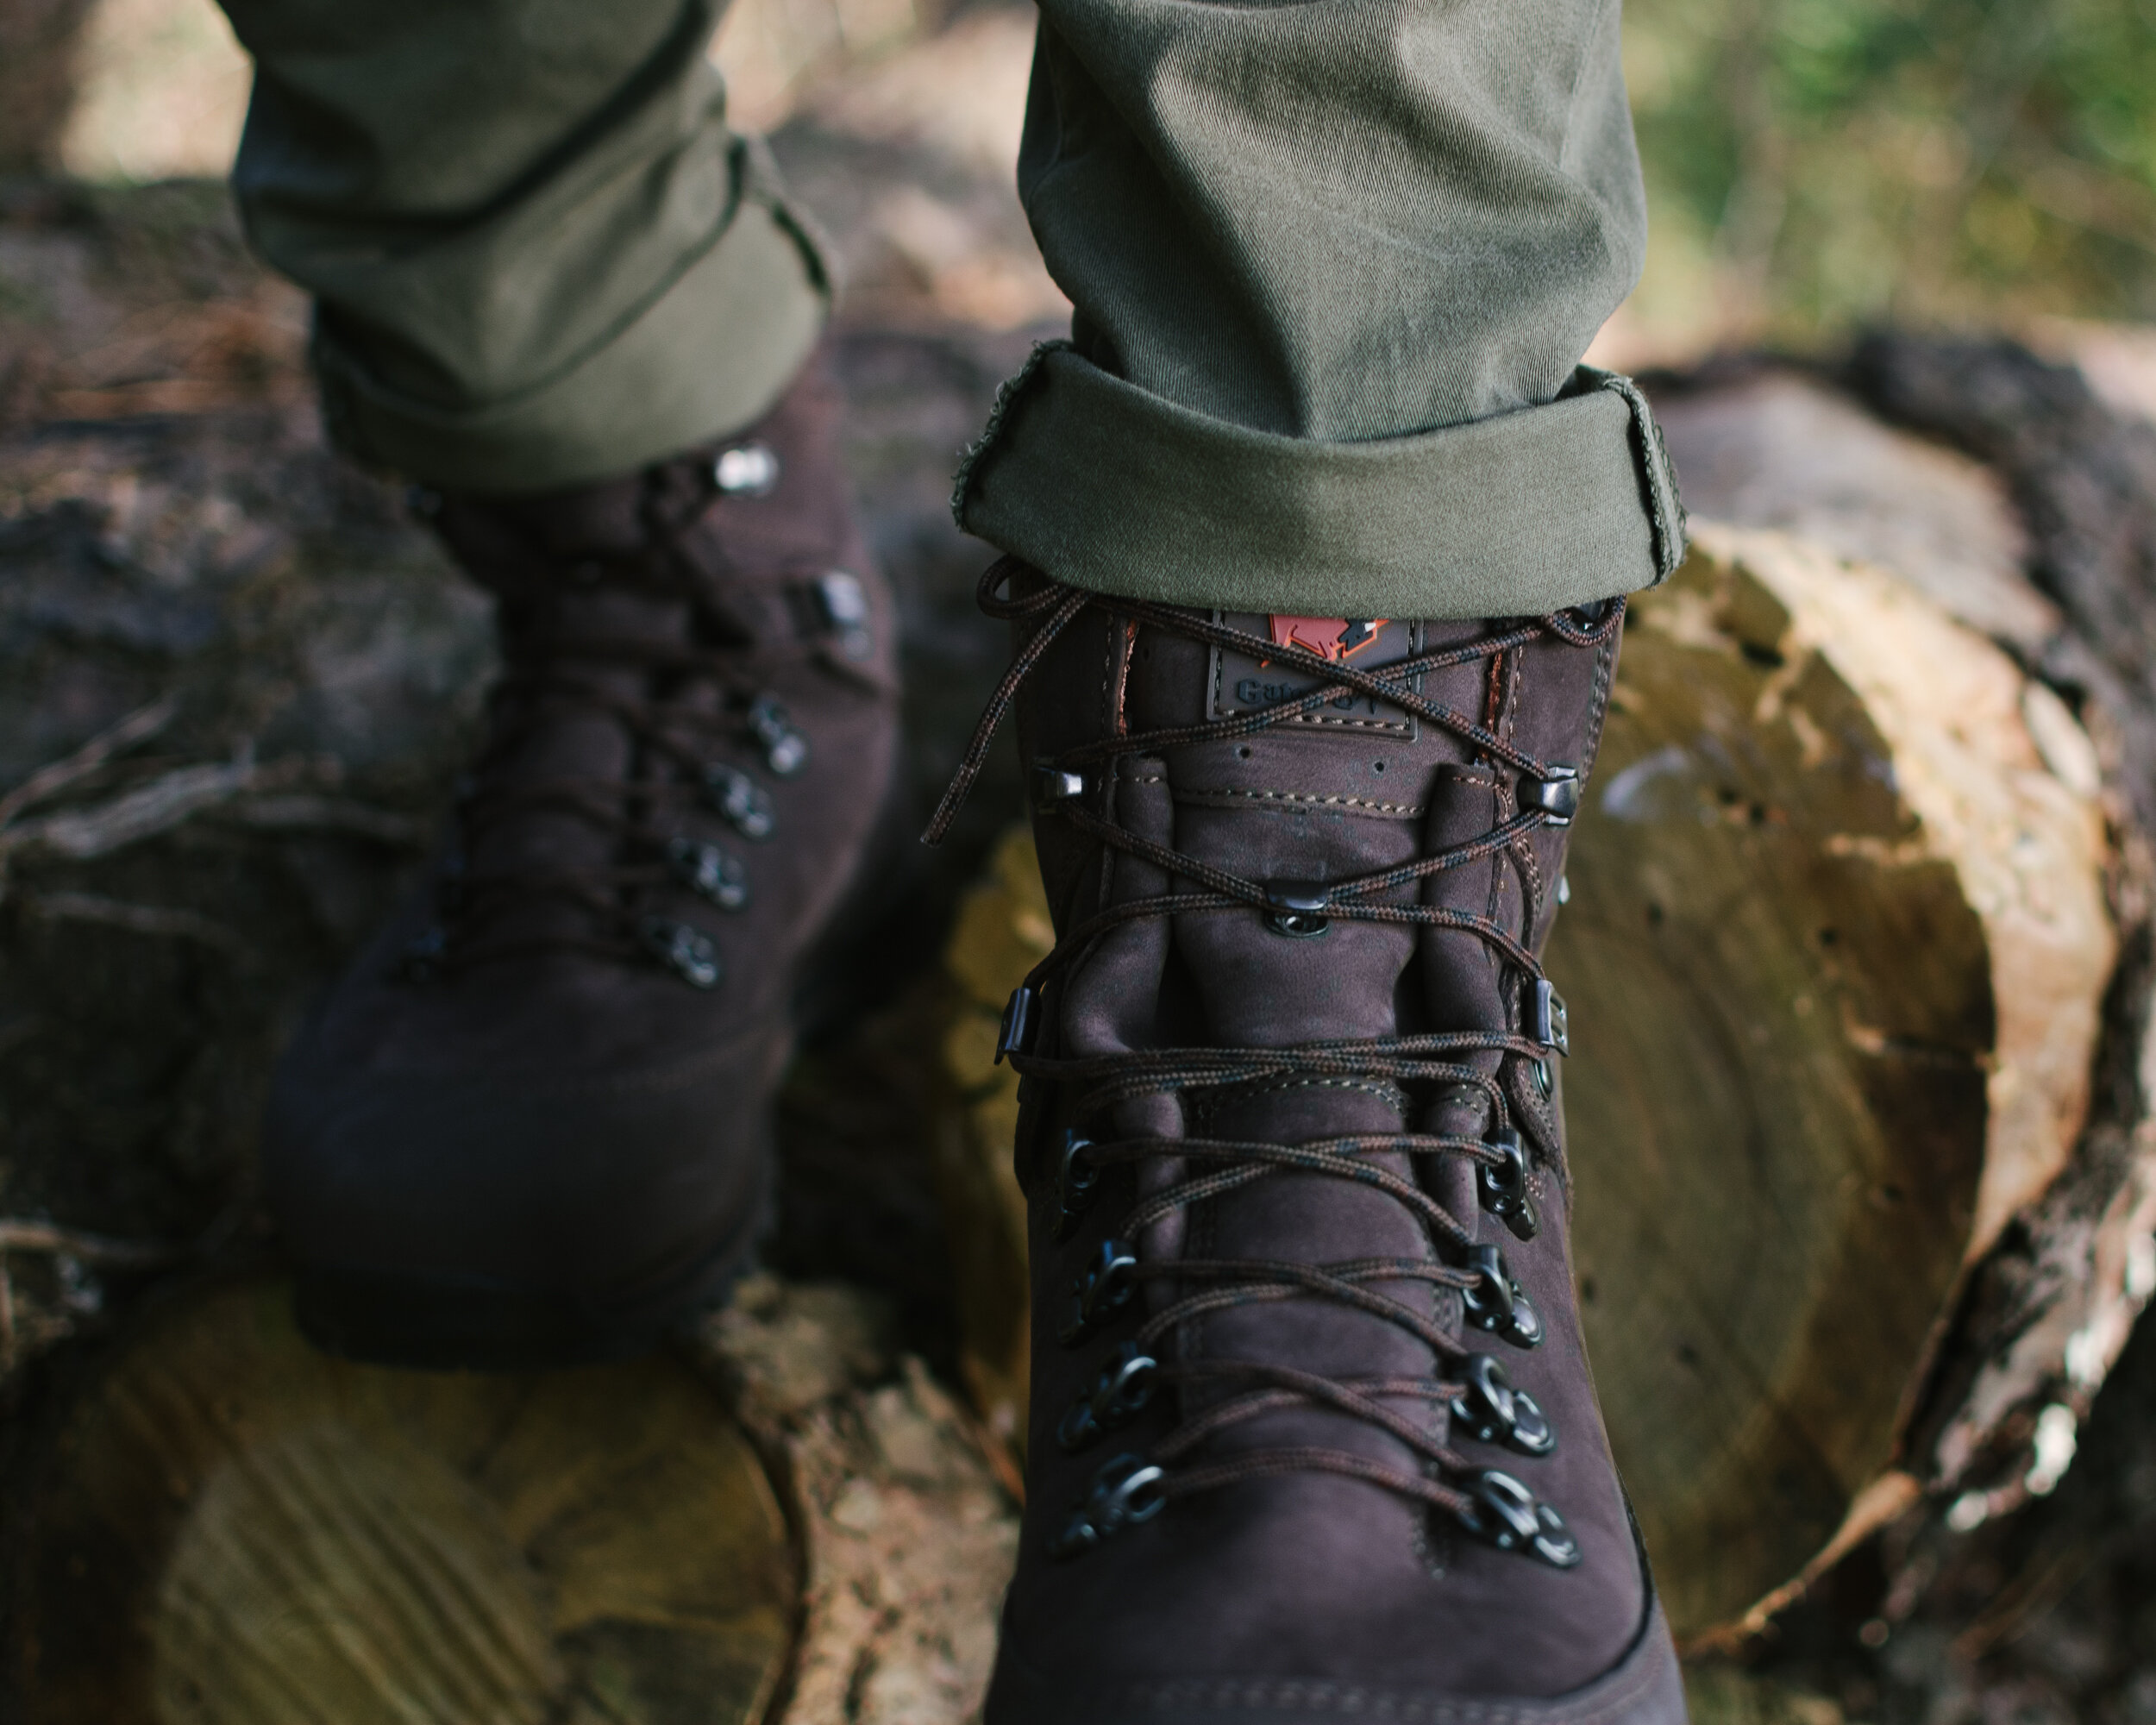 Gateway1 Fiordland Boots: Scandinavian hiking boots perfect for heavy in the outdoors — Dure Magazine